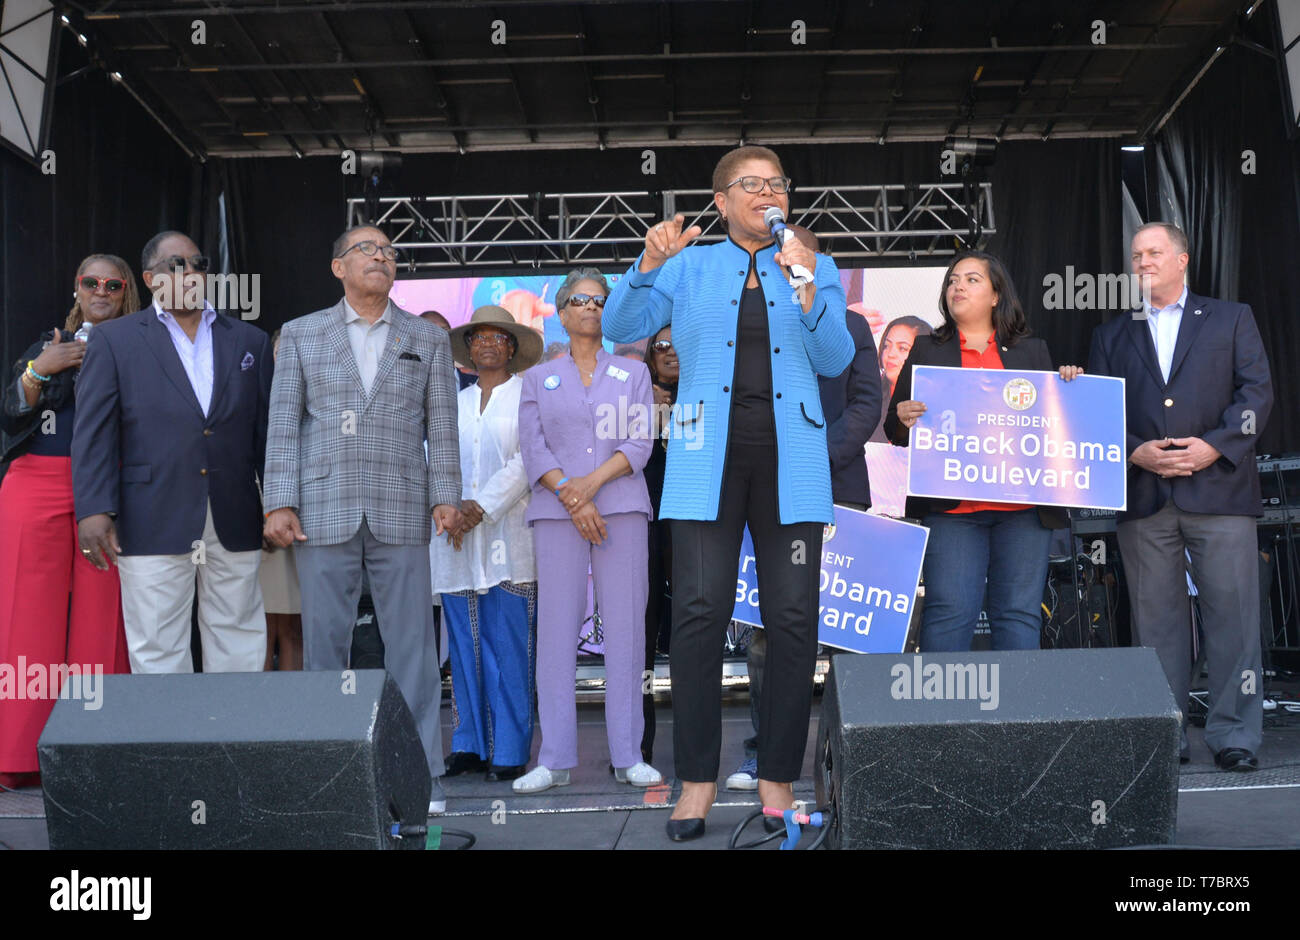 Los Angeles, Ca, USA. 4th May, 2019. Karen Bass at The City Of Los Angeles Officially Unveils Obama Boulevard In Honor Of The 44th President Of The United States Of America in Los Angeles, California on May 3, 2019. Credit: Koi Sojer/Snap'n U Photos/Media Punch/Alamy Live News Stock Photo